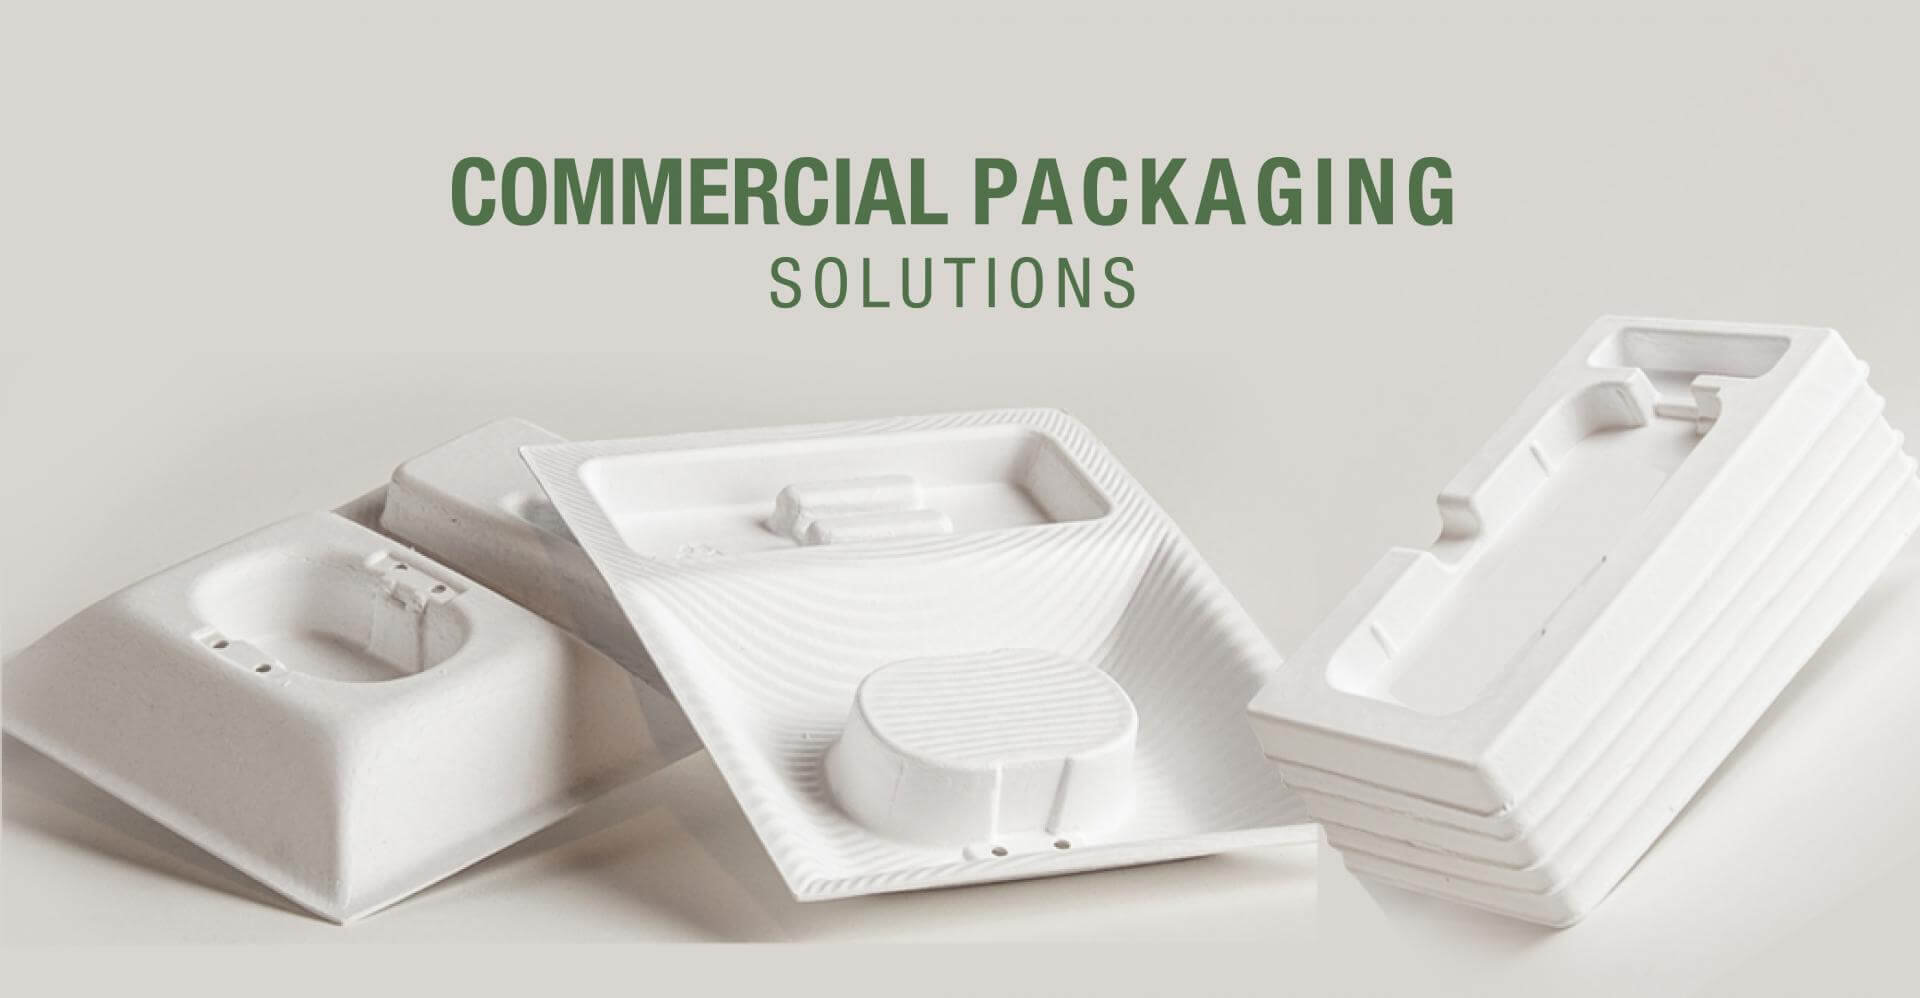  At Longyan Green Olive Environmental Protection Technology Co., Ltd. We are proud to provide our clients with many technology supports. We can deliver the help that you need to transform your approach to packaging moving forward. We can create a suite of designs for your commercial packaging, using our world-class R&D technology support.
Get your custom commercial packaging design now!